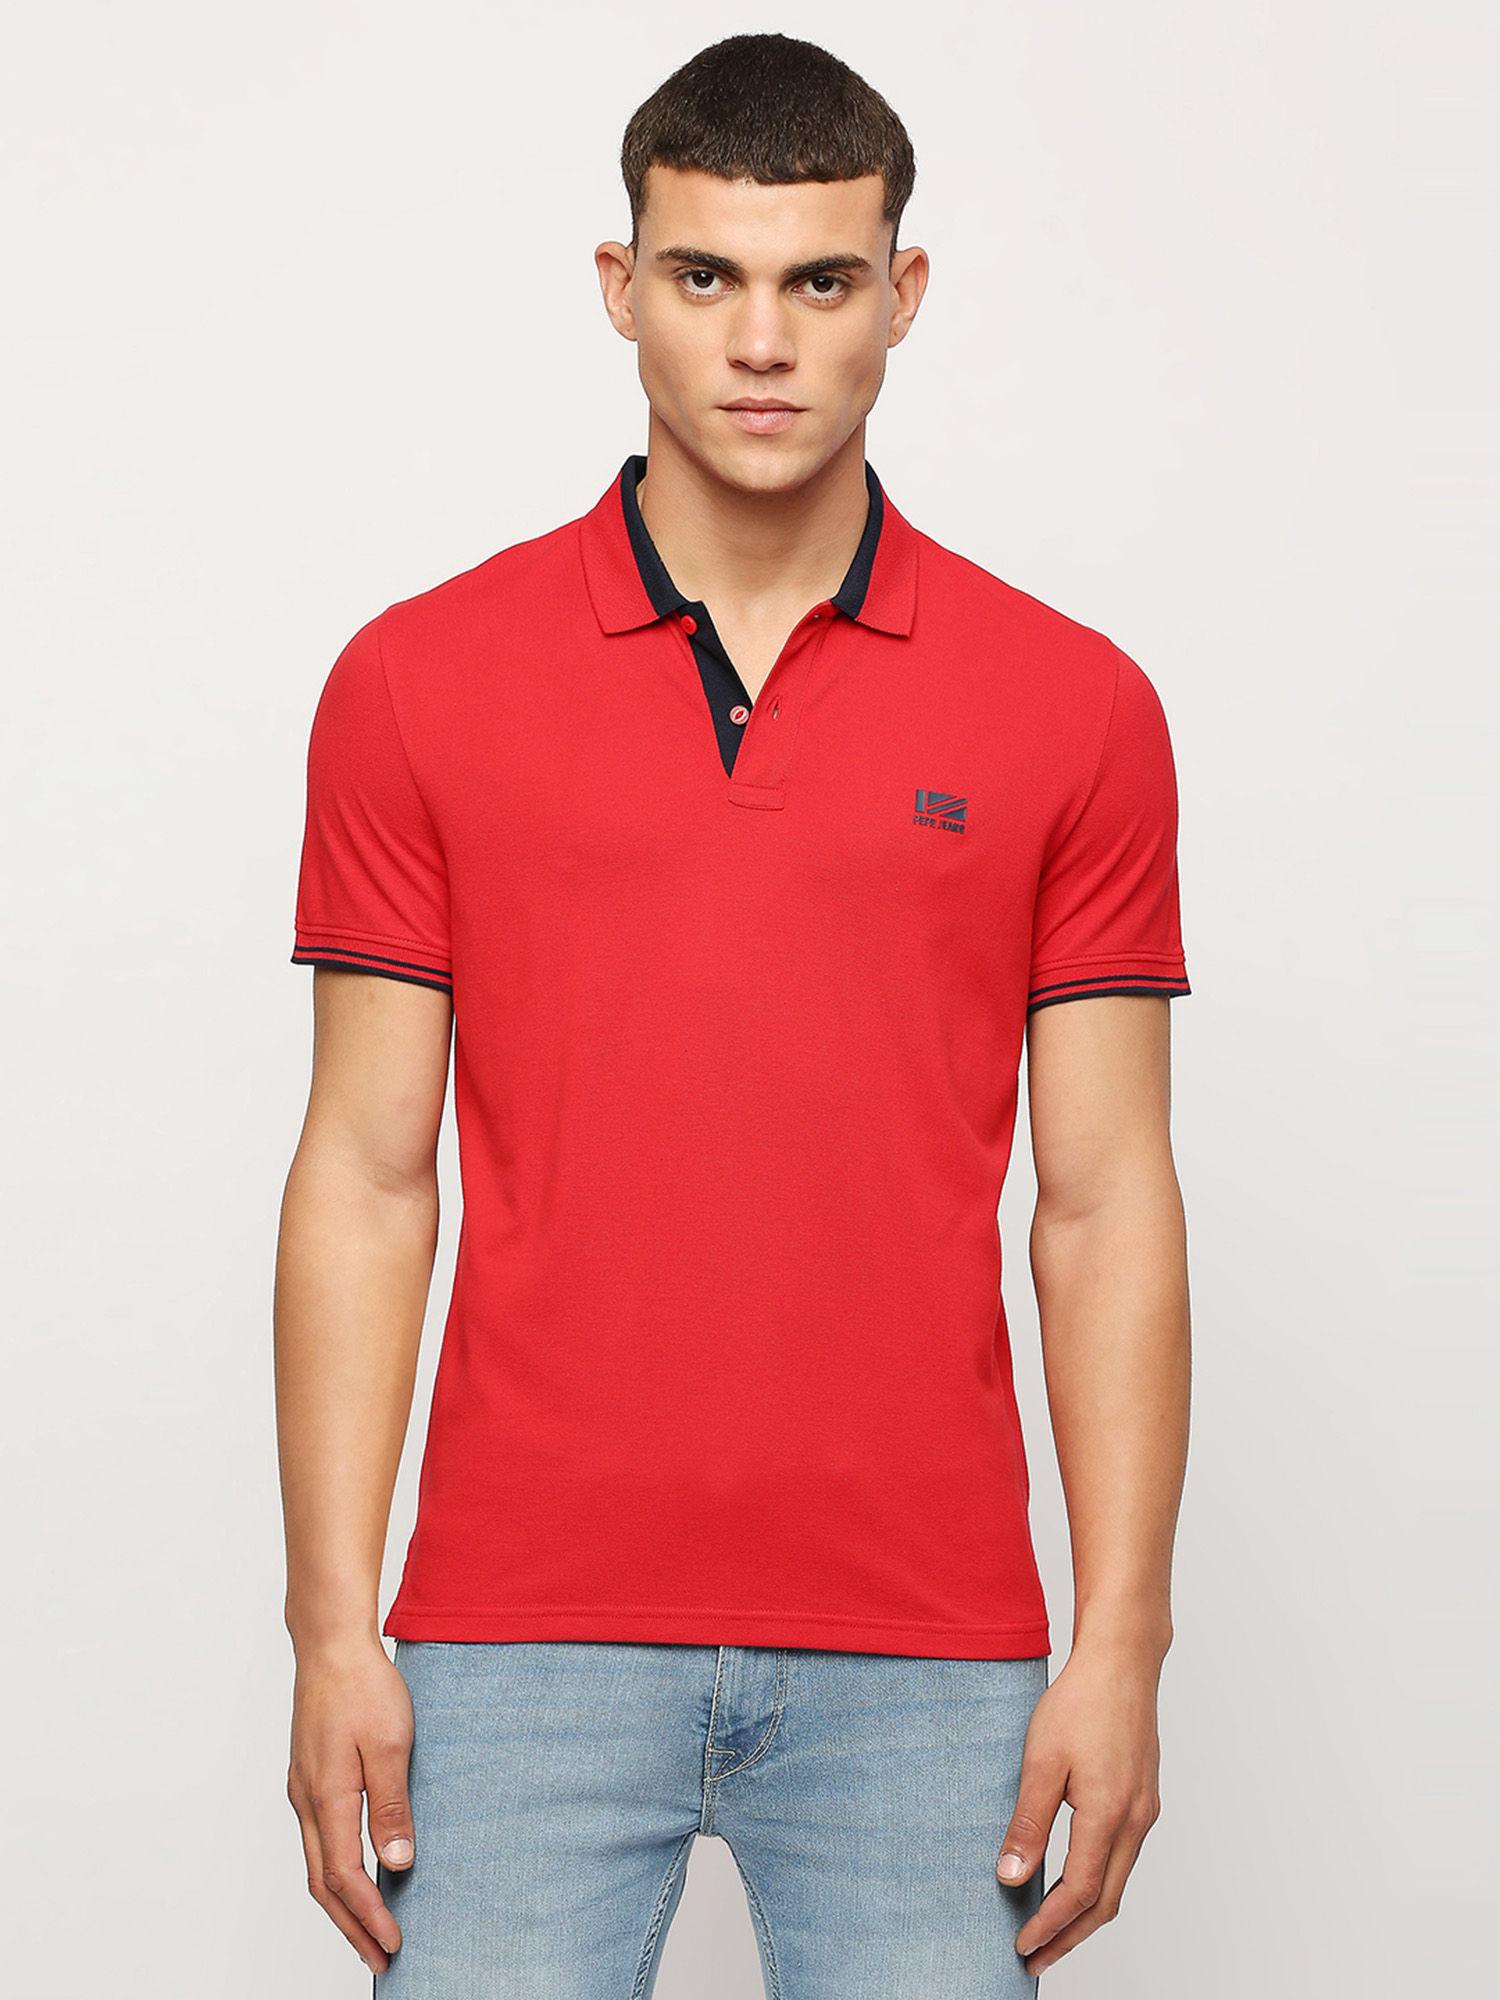 vincent-solid-pq-polo-t-shirt-red